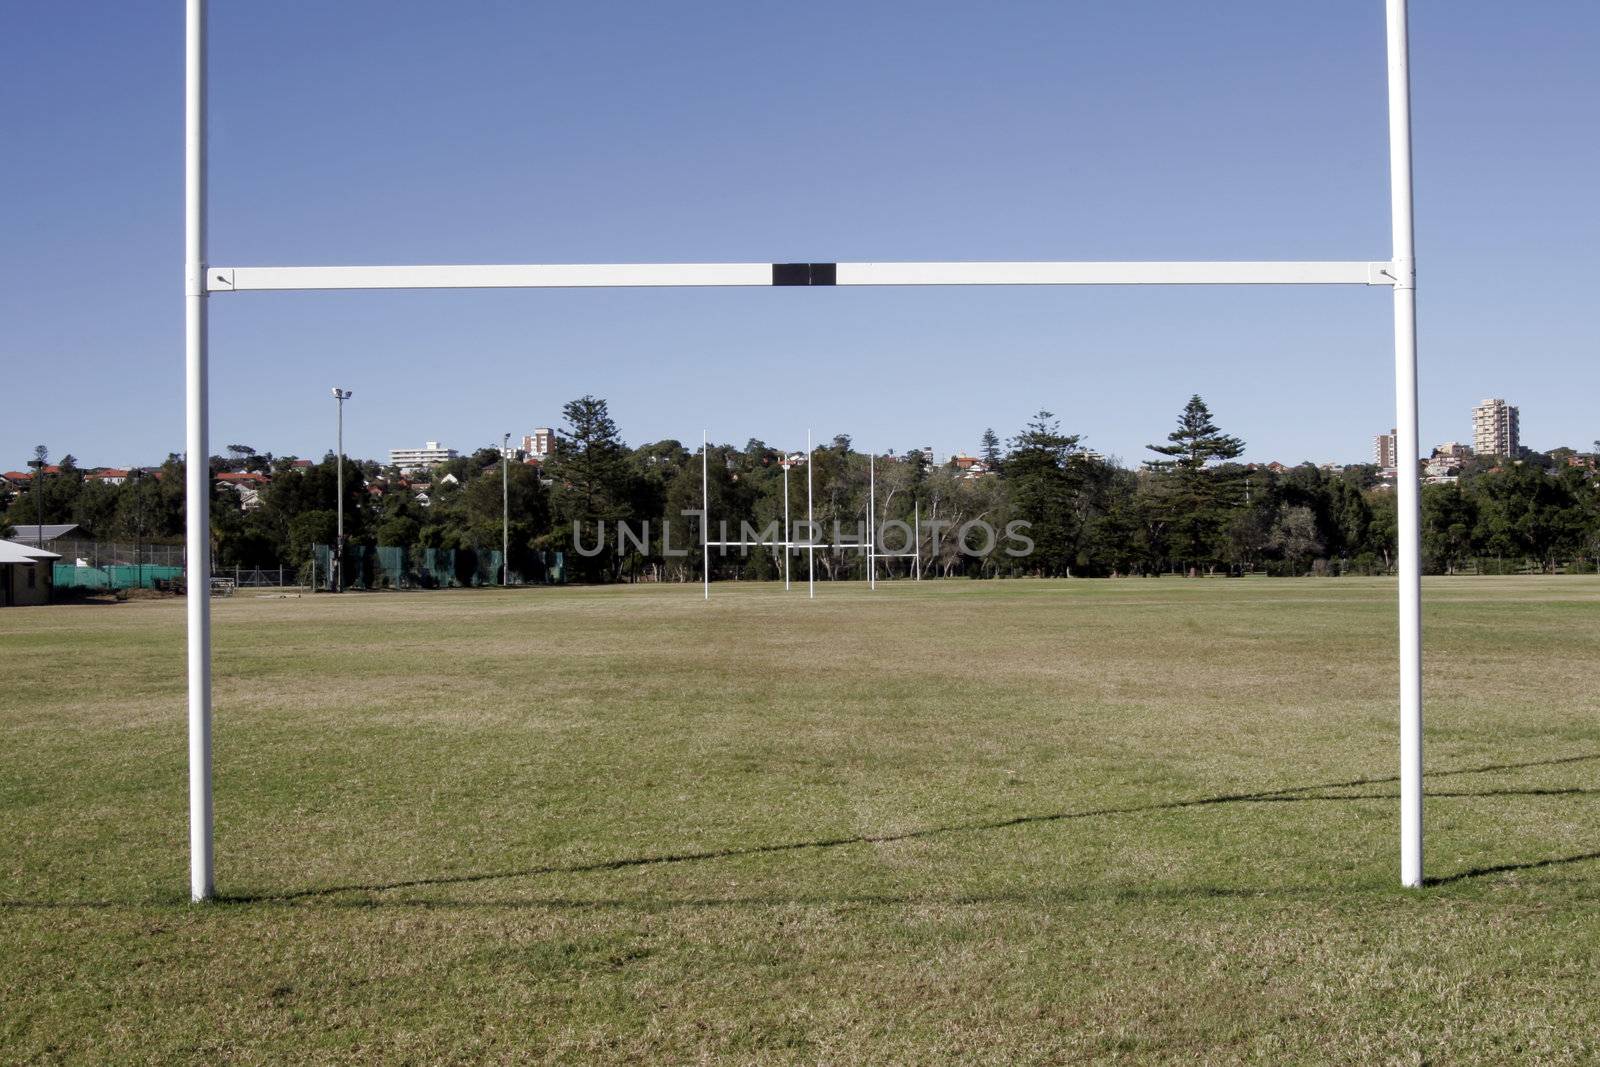 Rugby Field - Goal by thorsten